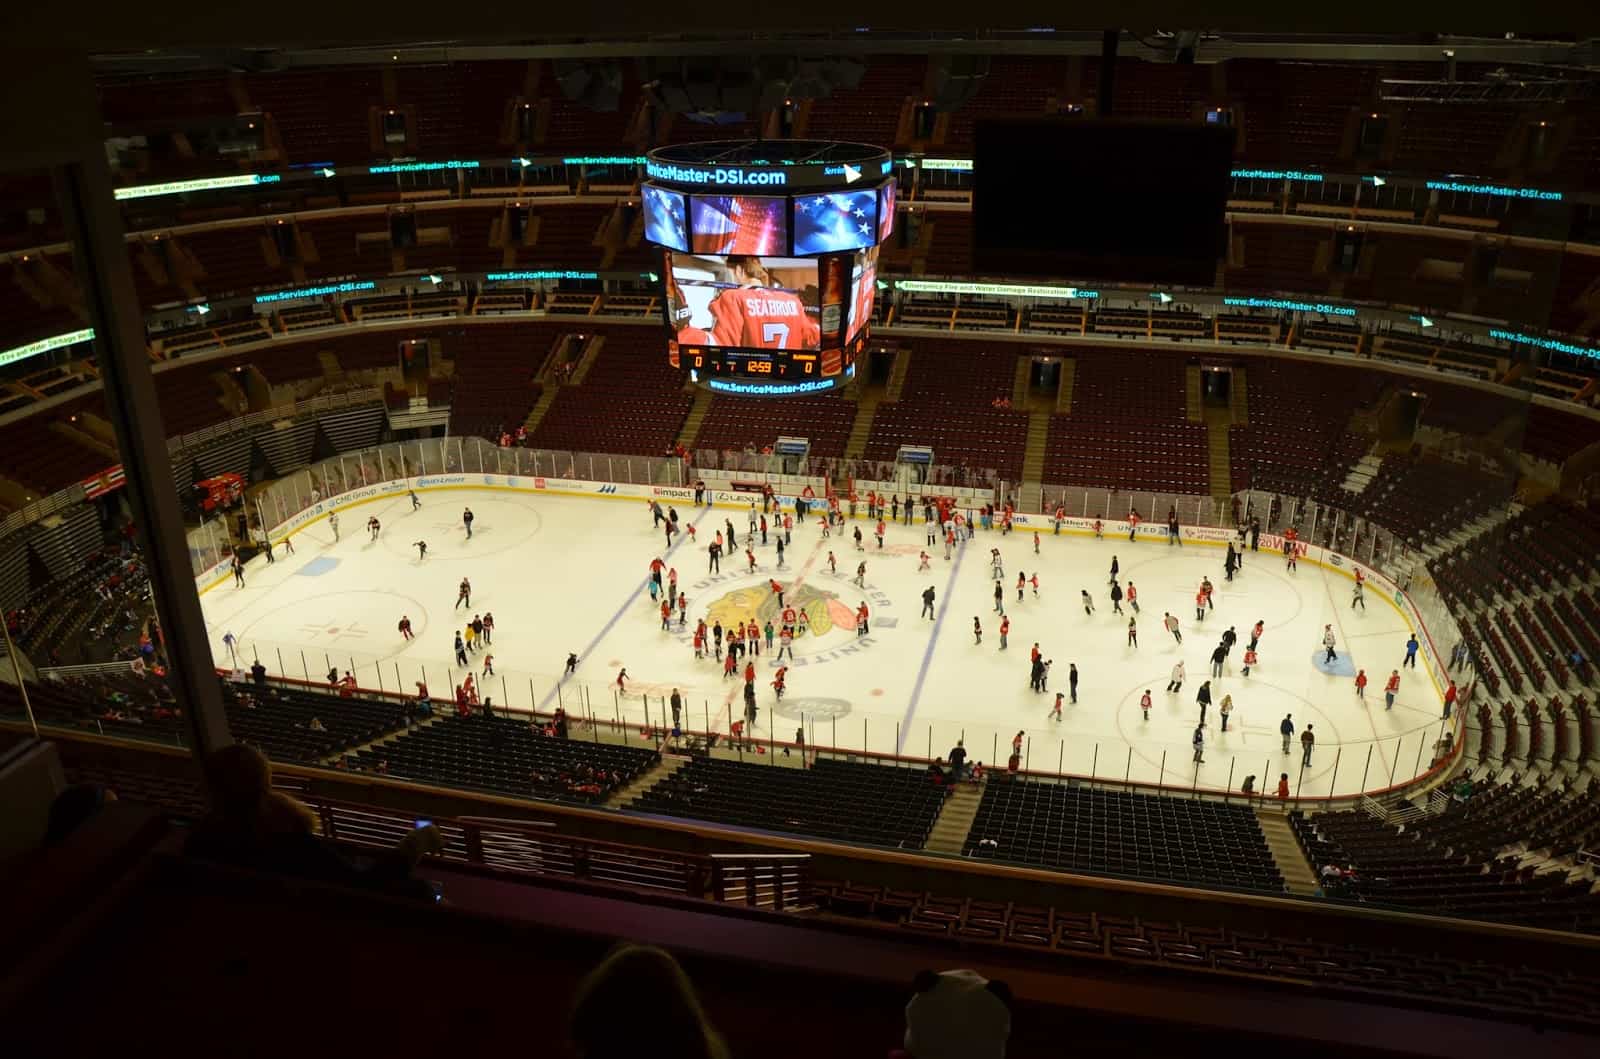 The view from the press box at the United Center, Chicago, Illinois